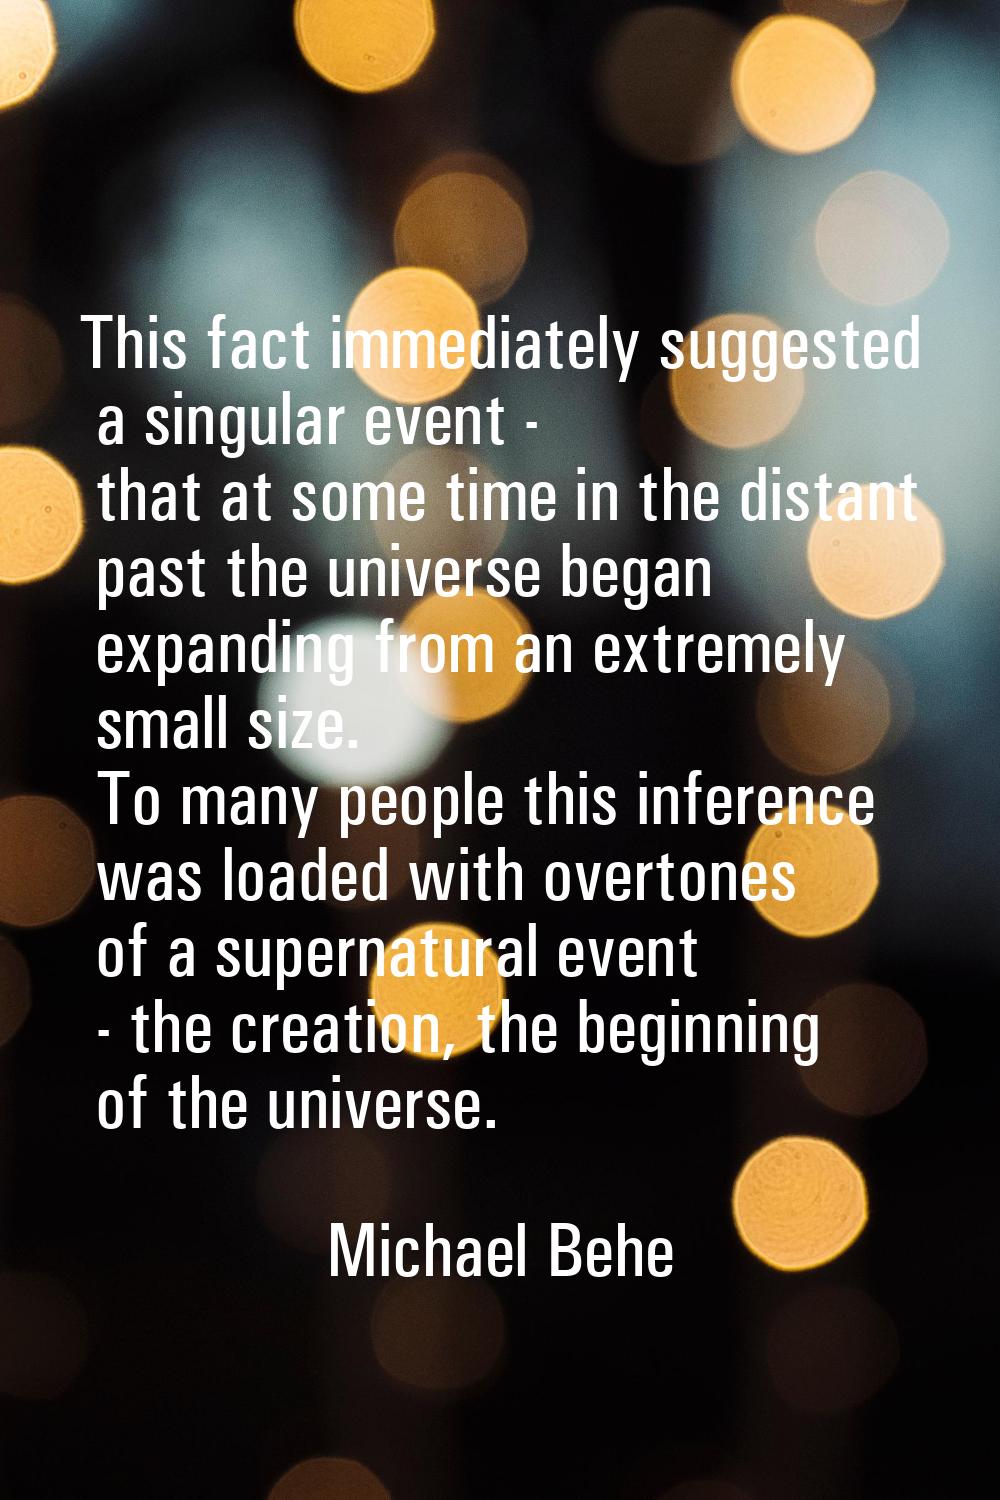 This fact immediately suggested a singular event - that at some time in the distant past the univer